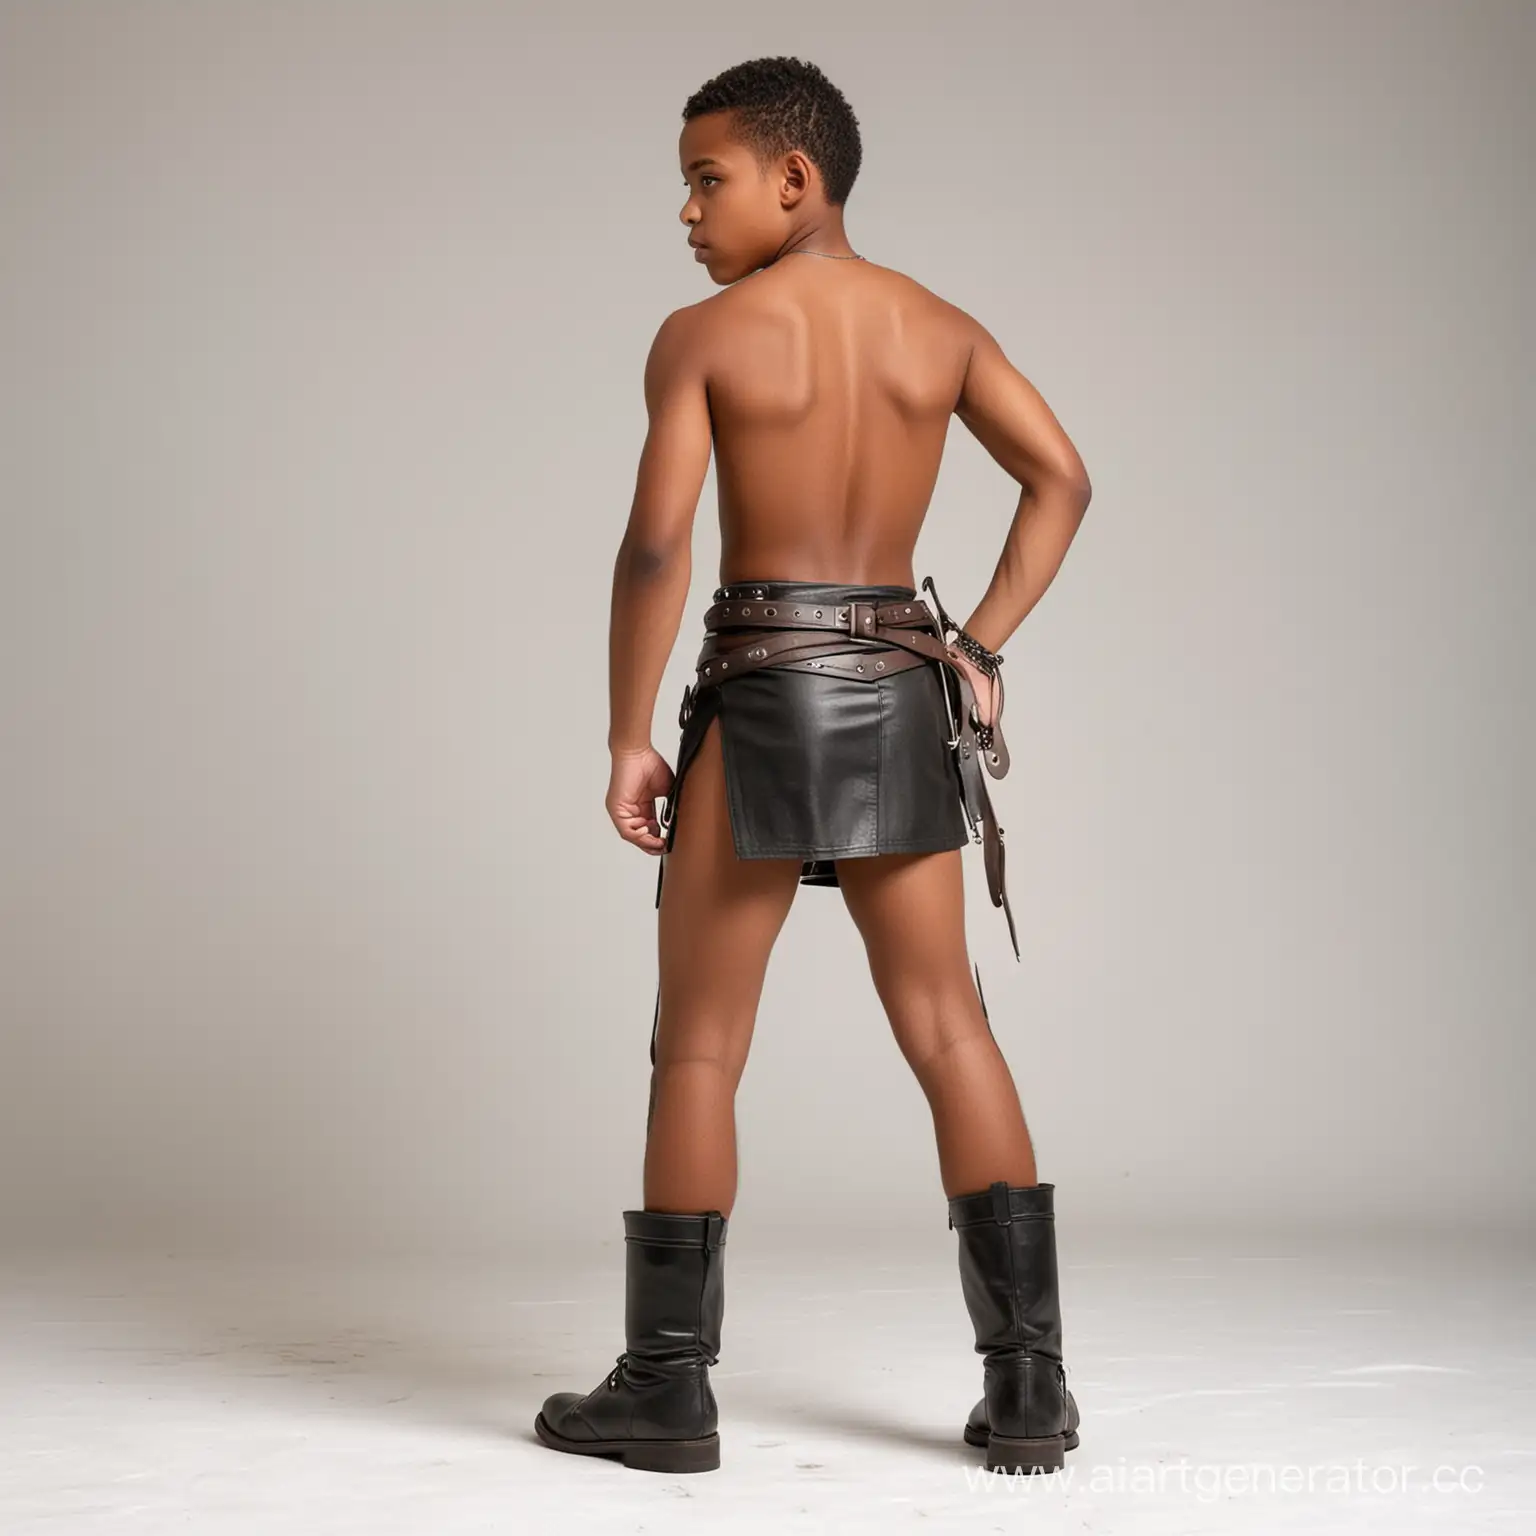 Black-Shirtless-Teenage-Boy-Warrior-Crouching-in-Short-Loincloth-and-Leather-Belt